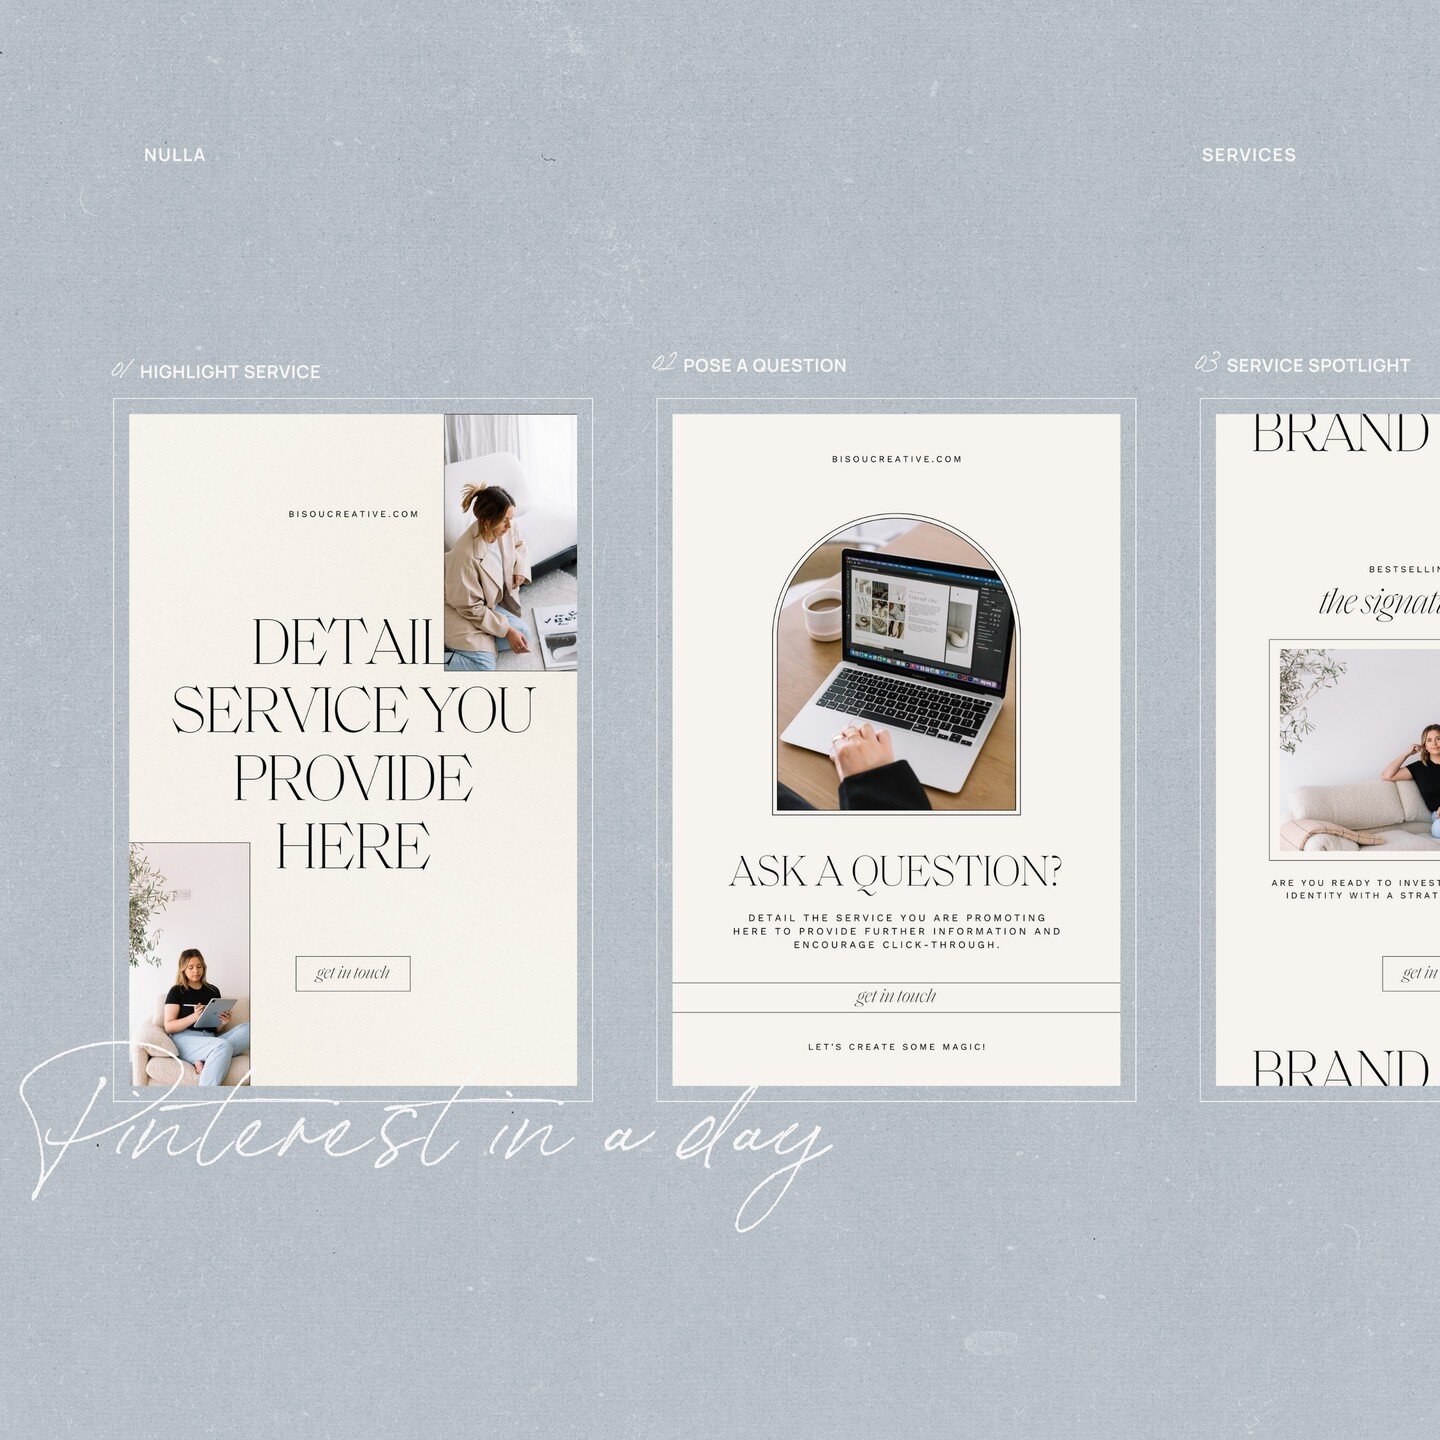 pinterest templates for @bisoucreative⁠
⁠
all created in just one day as part of our pinterest in a day service.⁠
⁠
keen to find out more? let's chat!